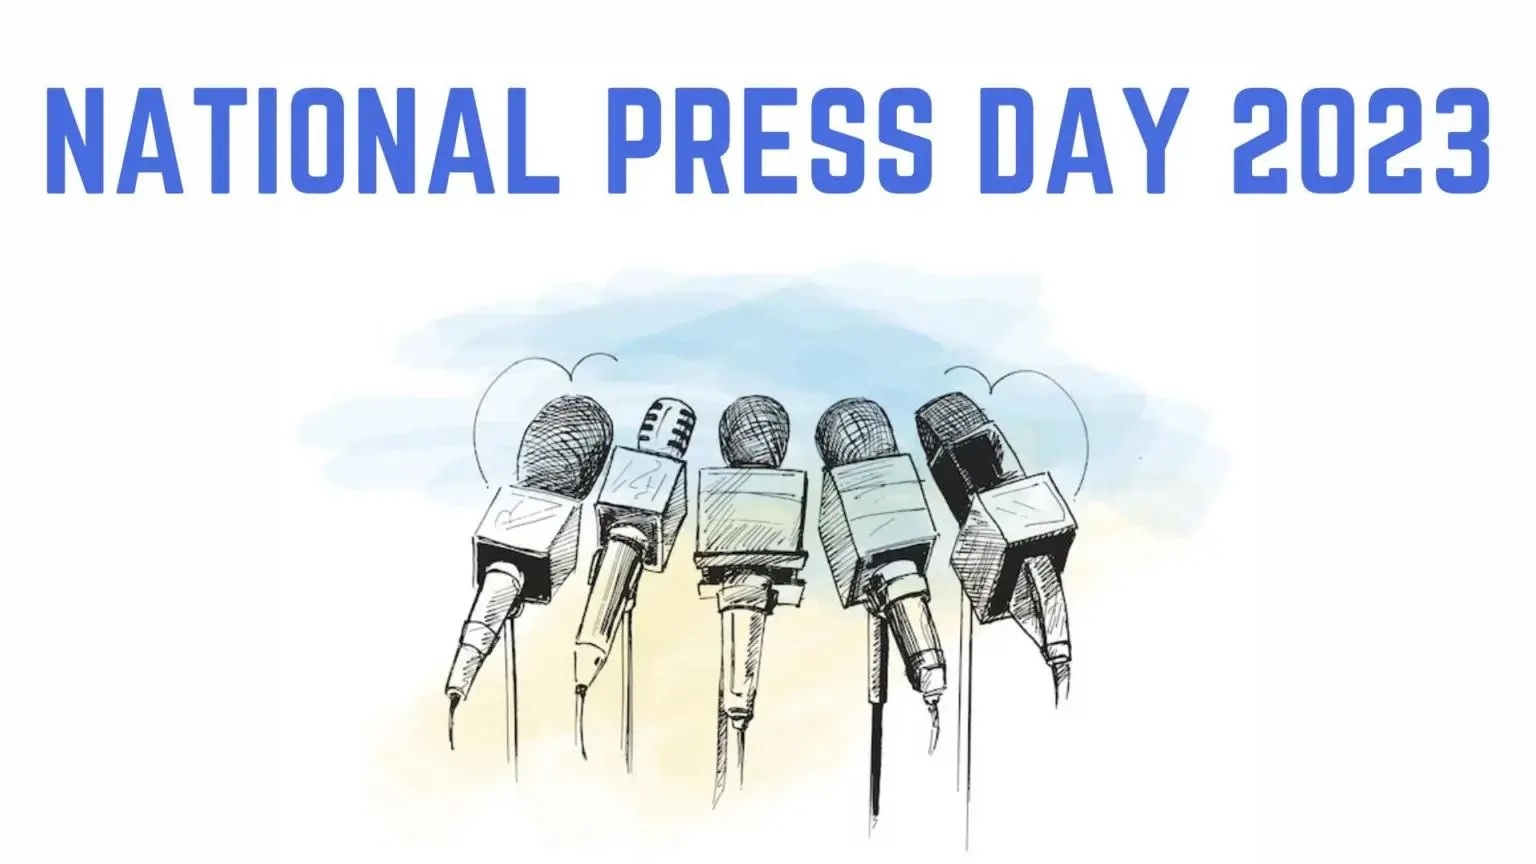 CM extends wishes to press fraternity on National Press Day